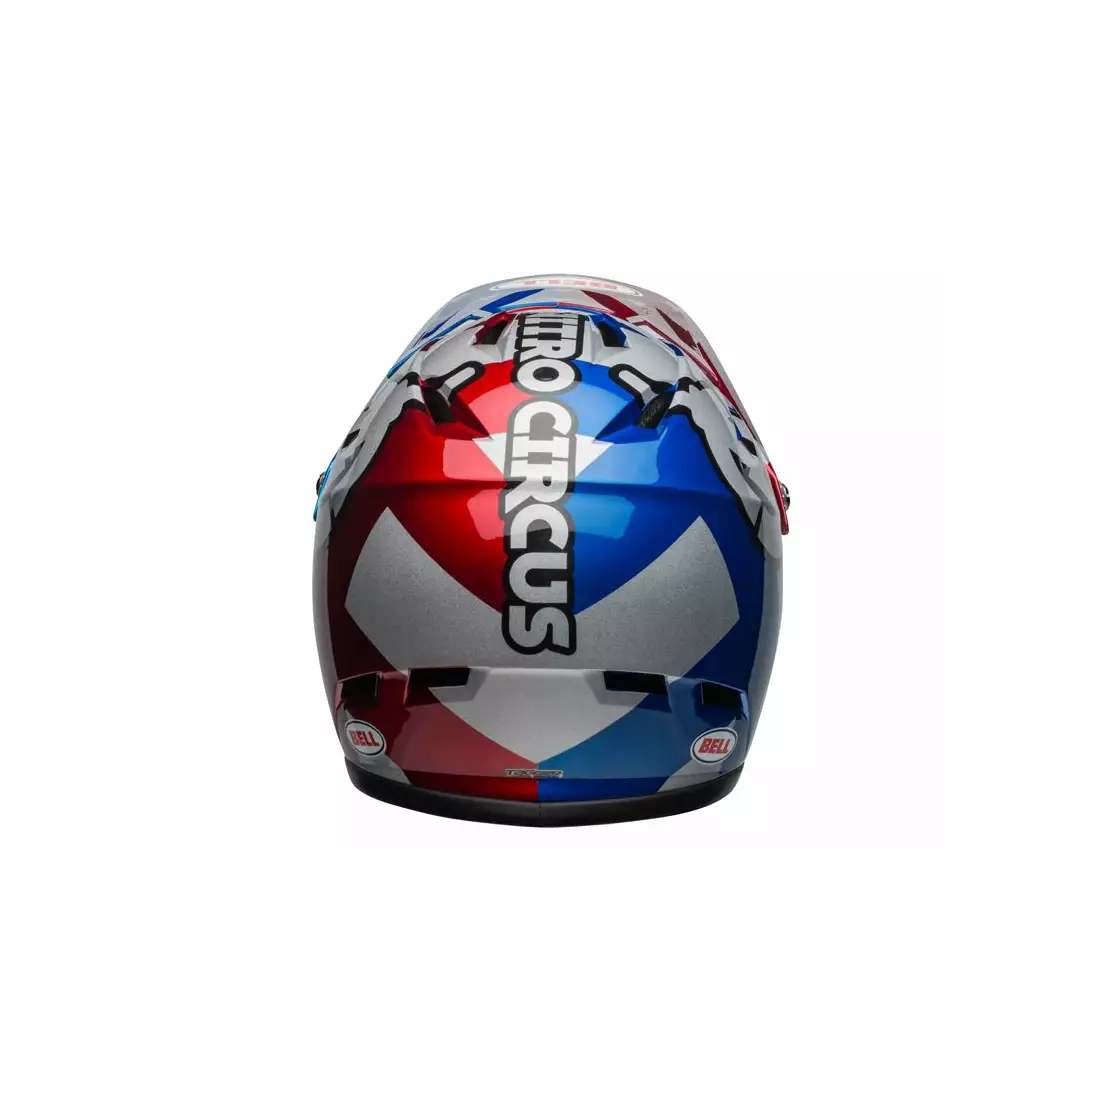 BELL SANCTION Full Face Fahrradhelm, nitro circus gloss silver blue red